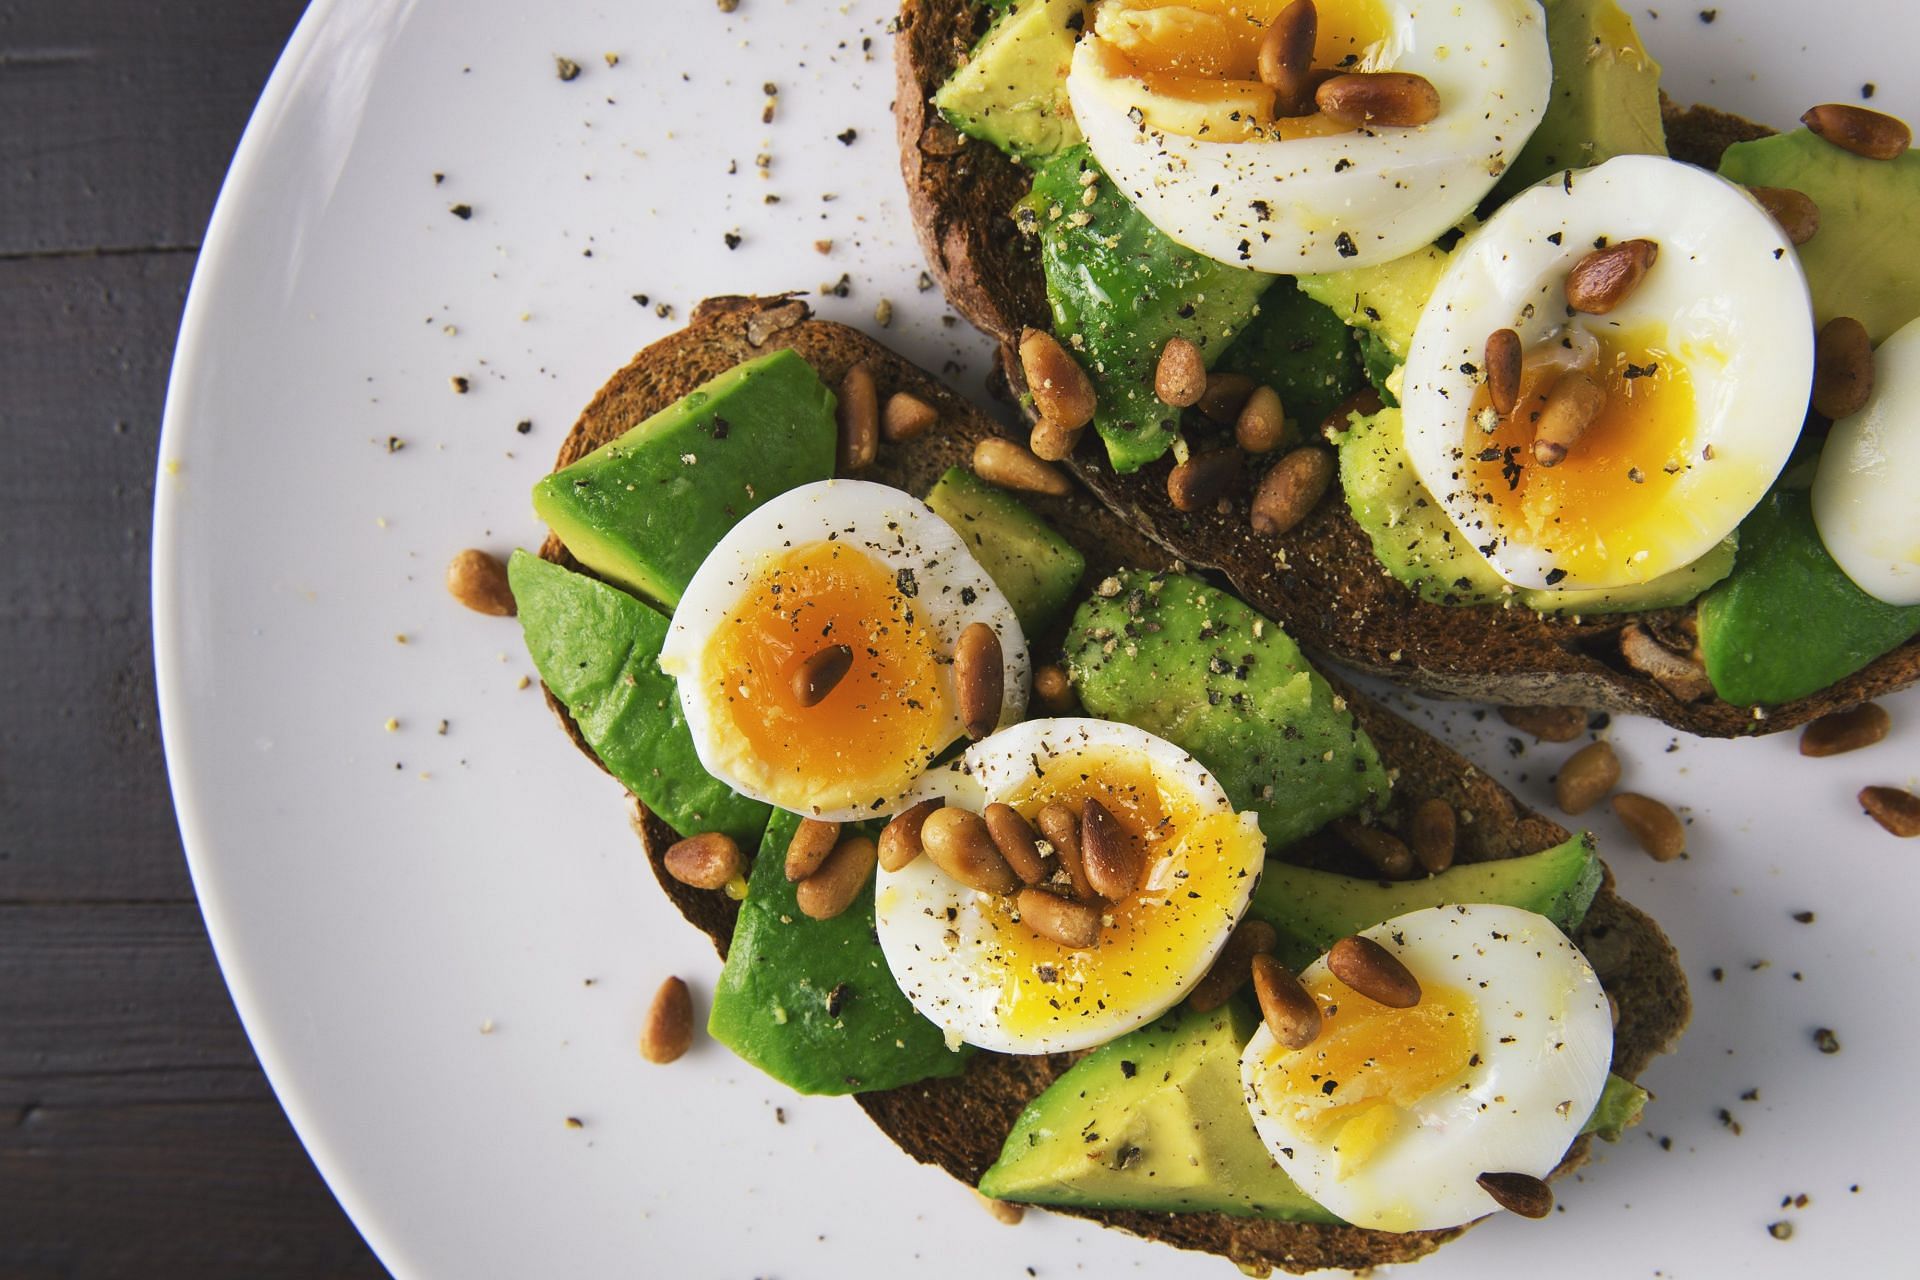 Importance of avocados for anti-wrinkle properties (image sourced via Pexels / Photo by Foodie factor)